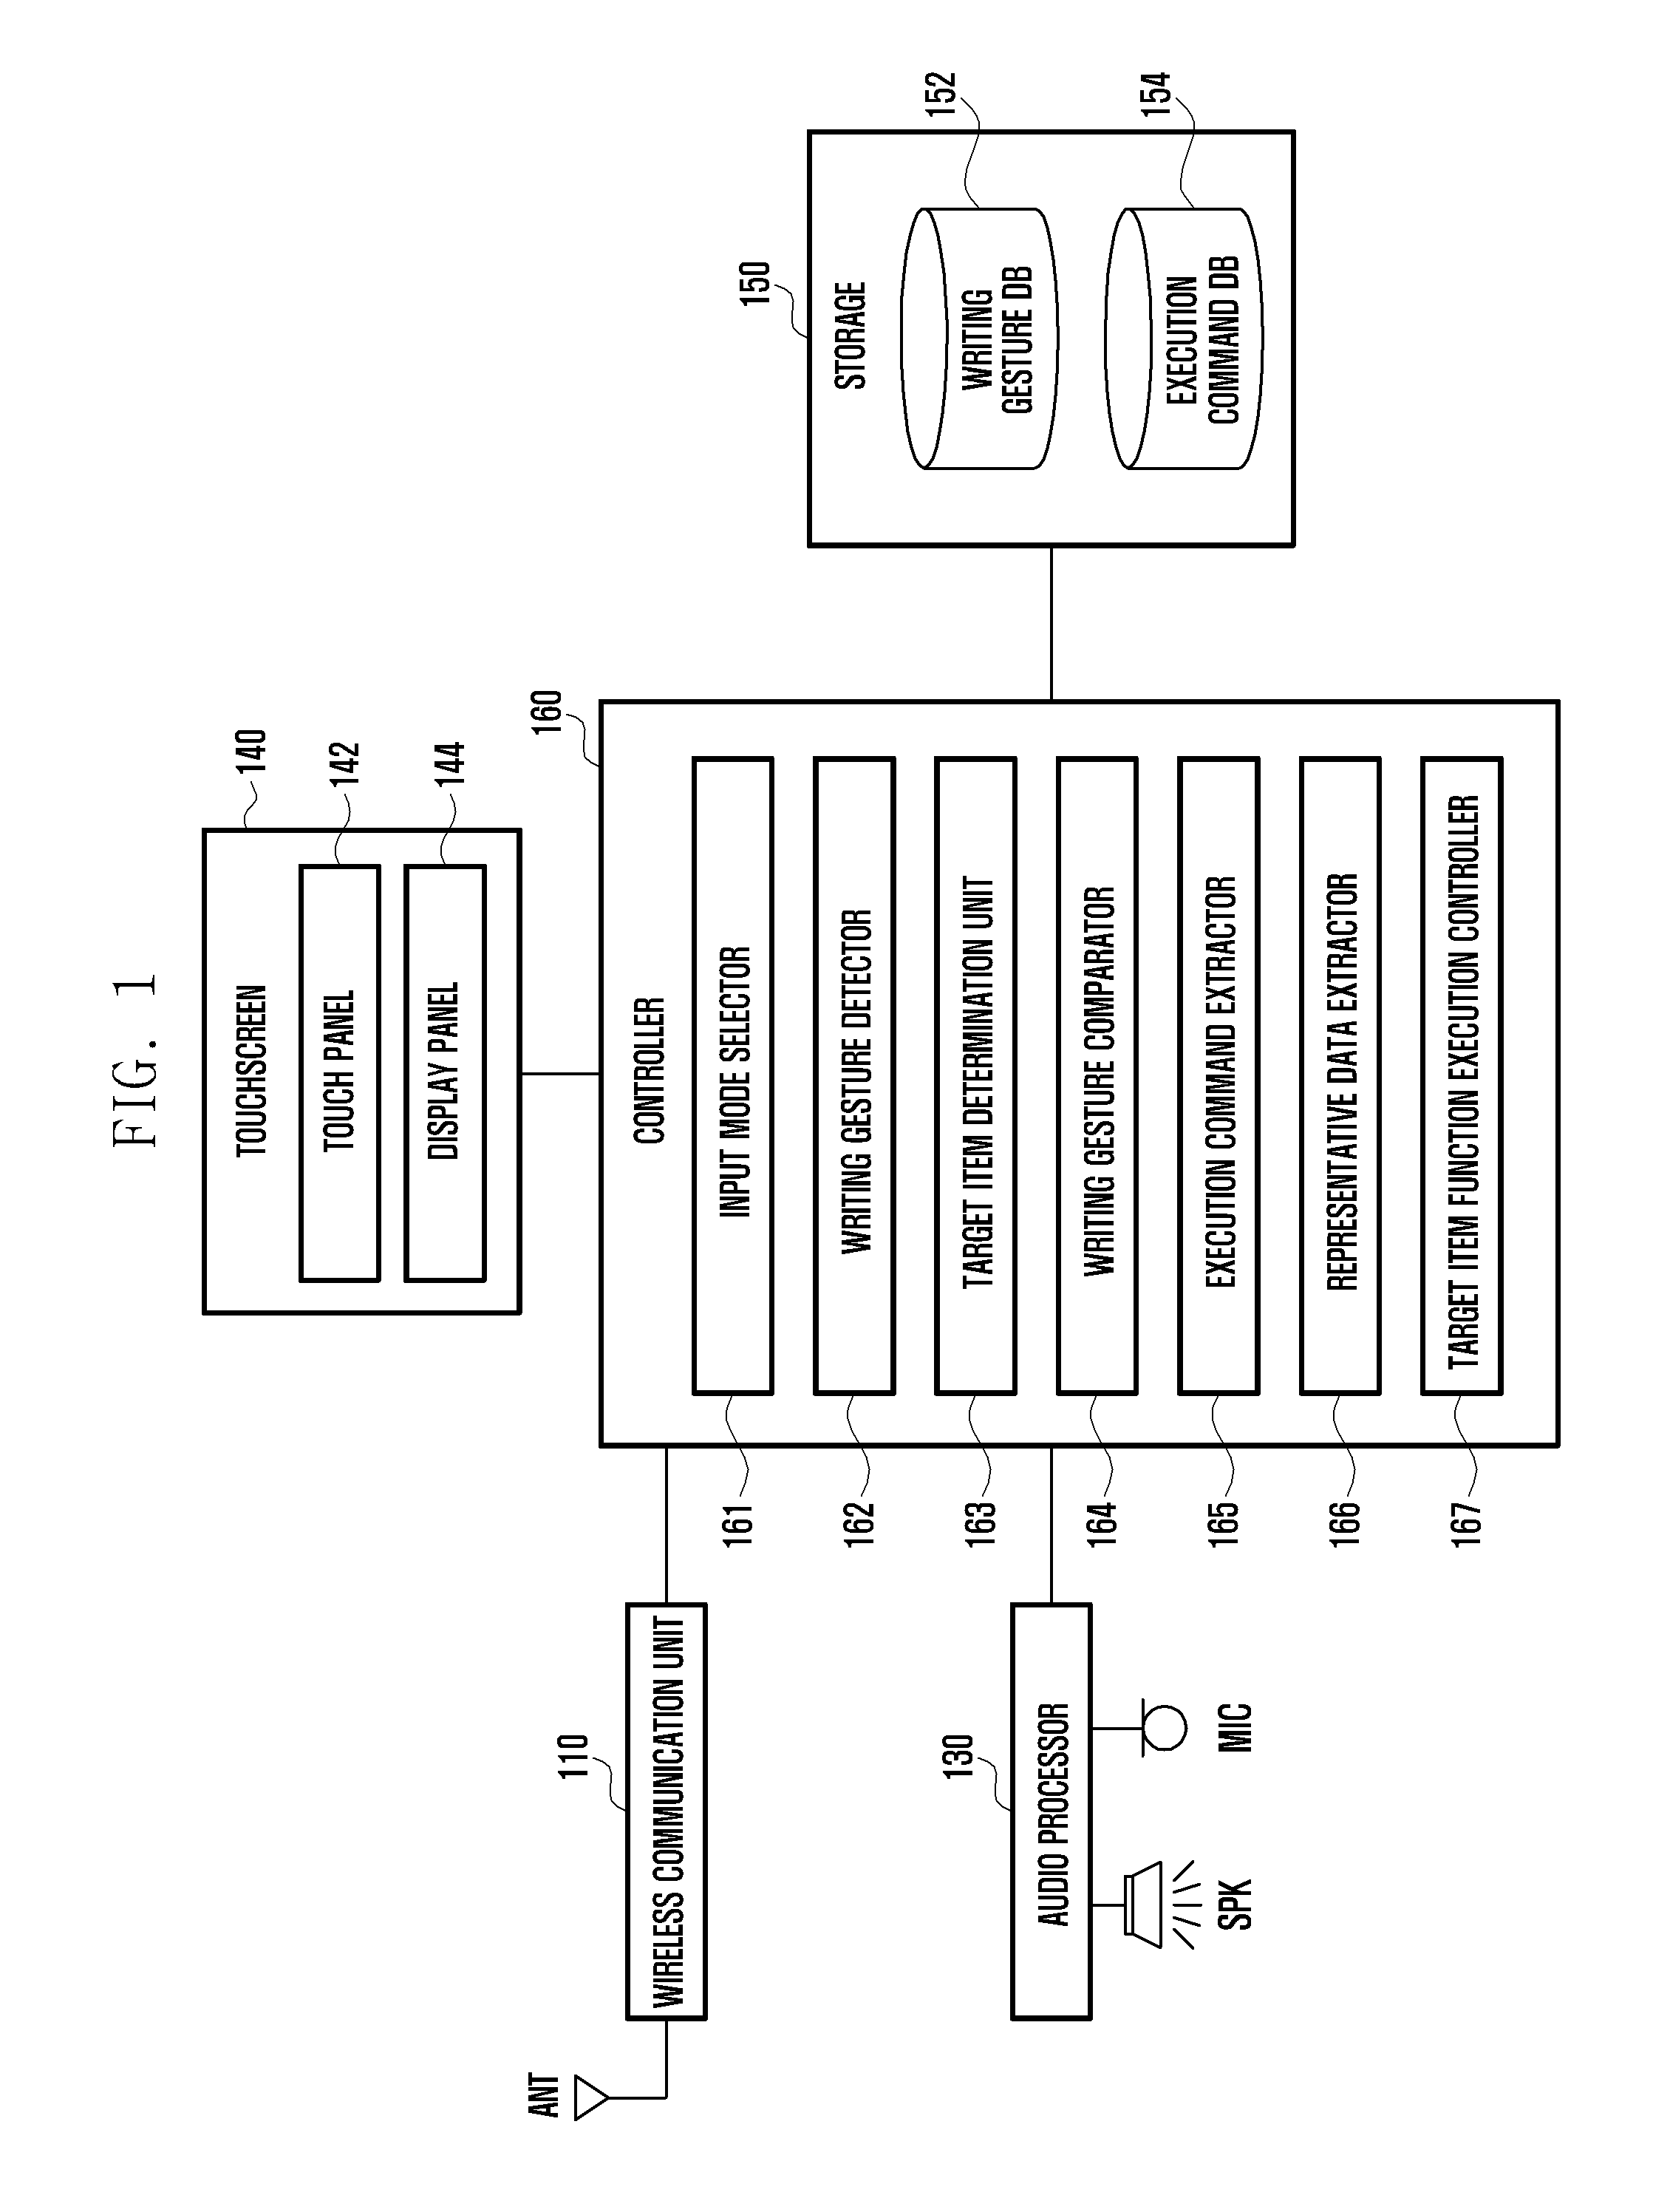 Method of controlling function execution in a mobile terminal by recognizing writing gesture and apparatus for performing the same